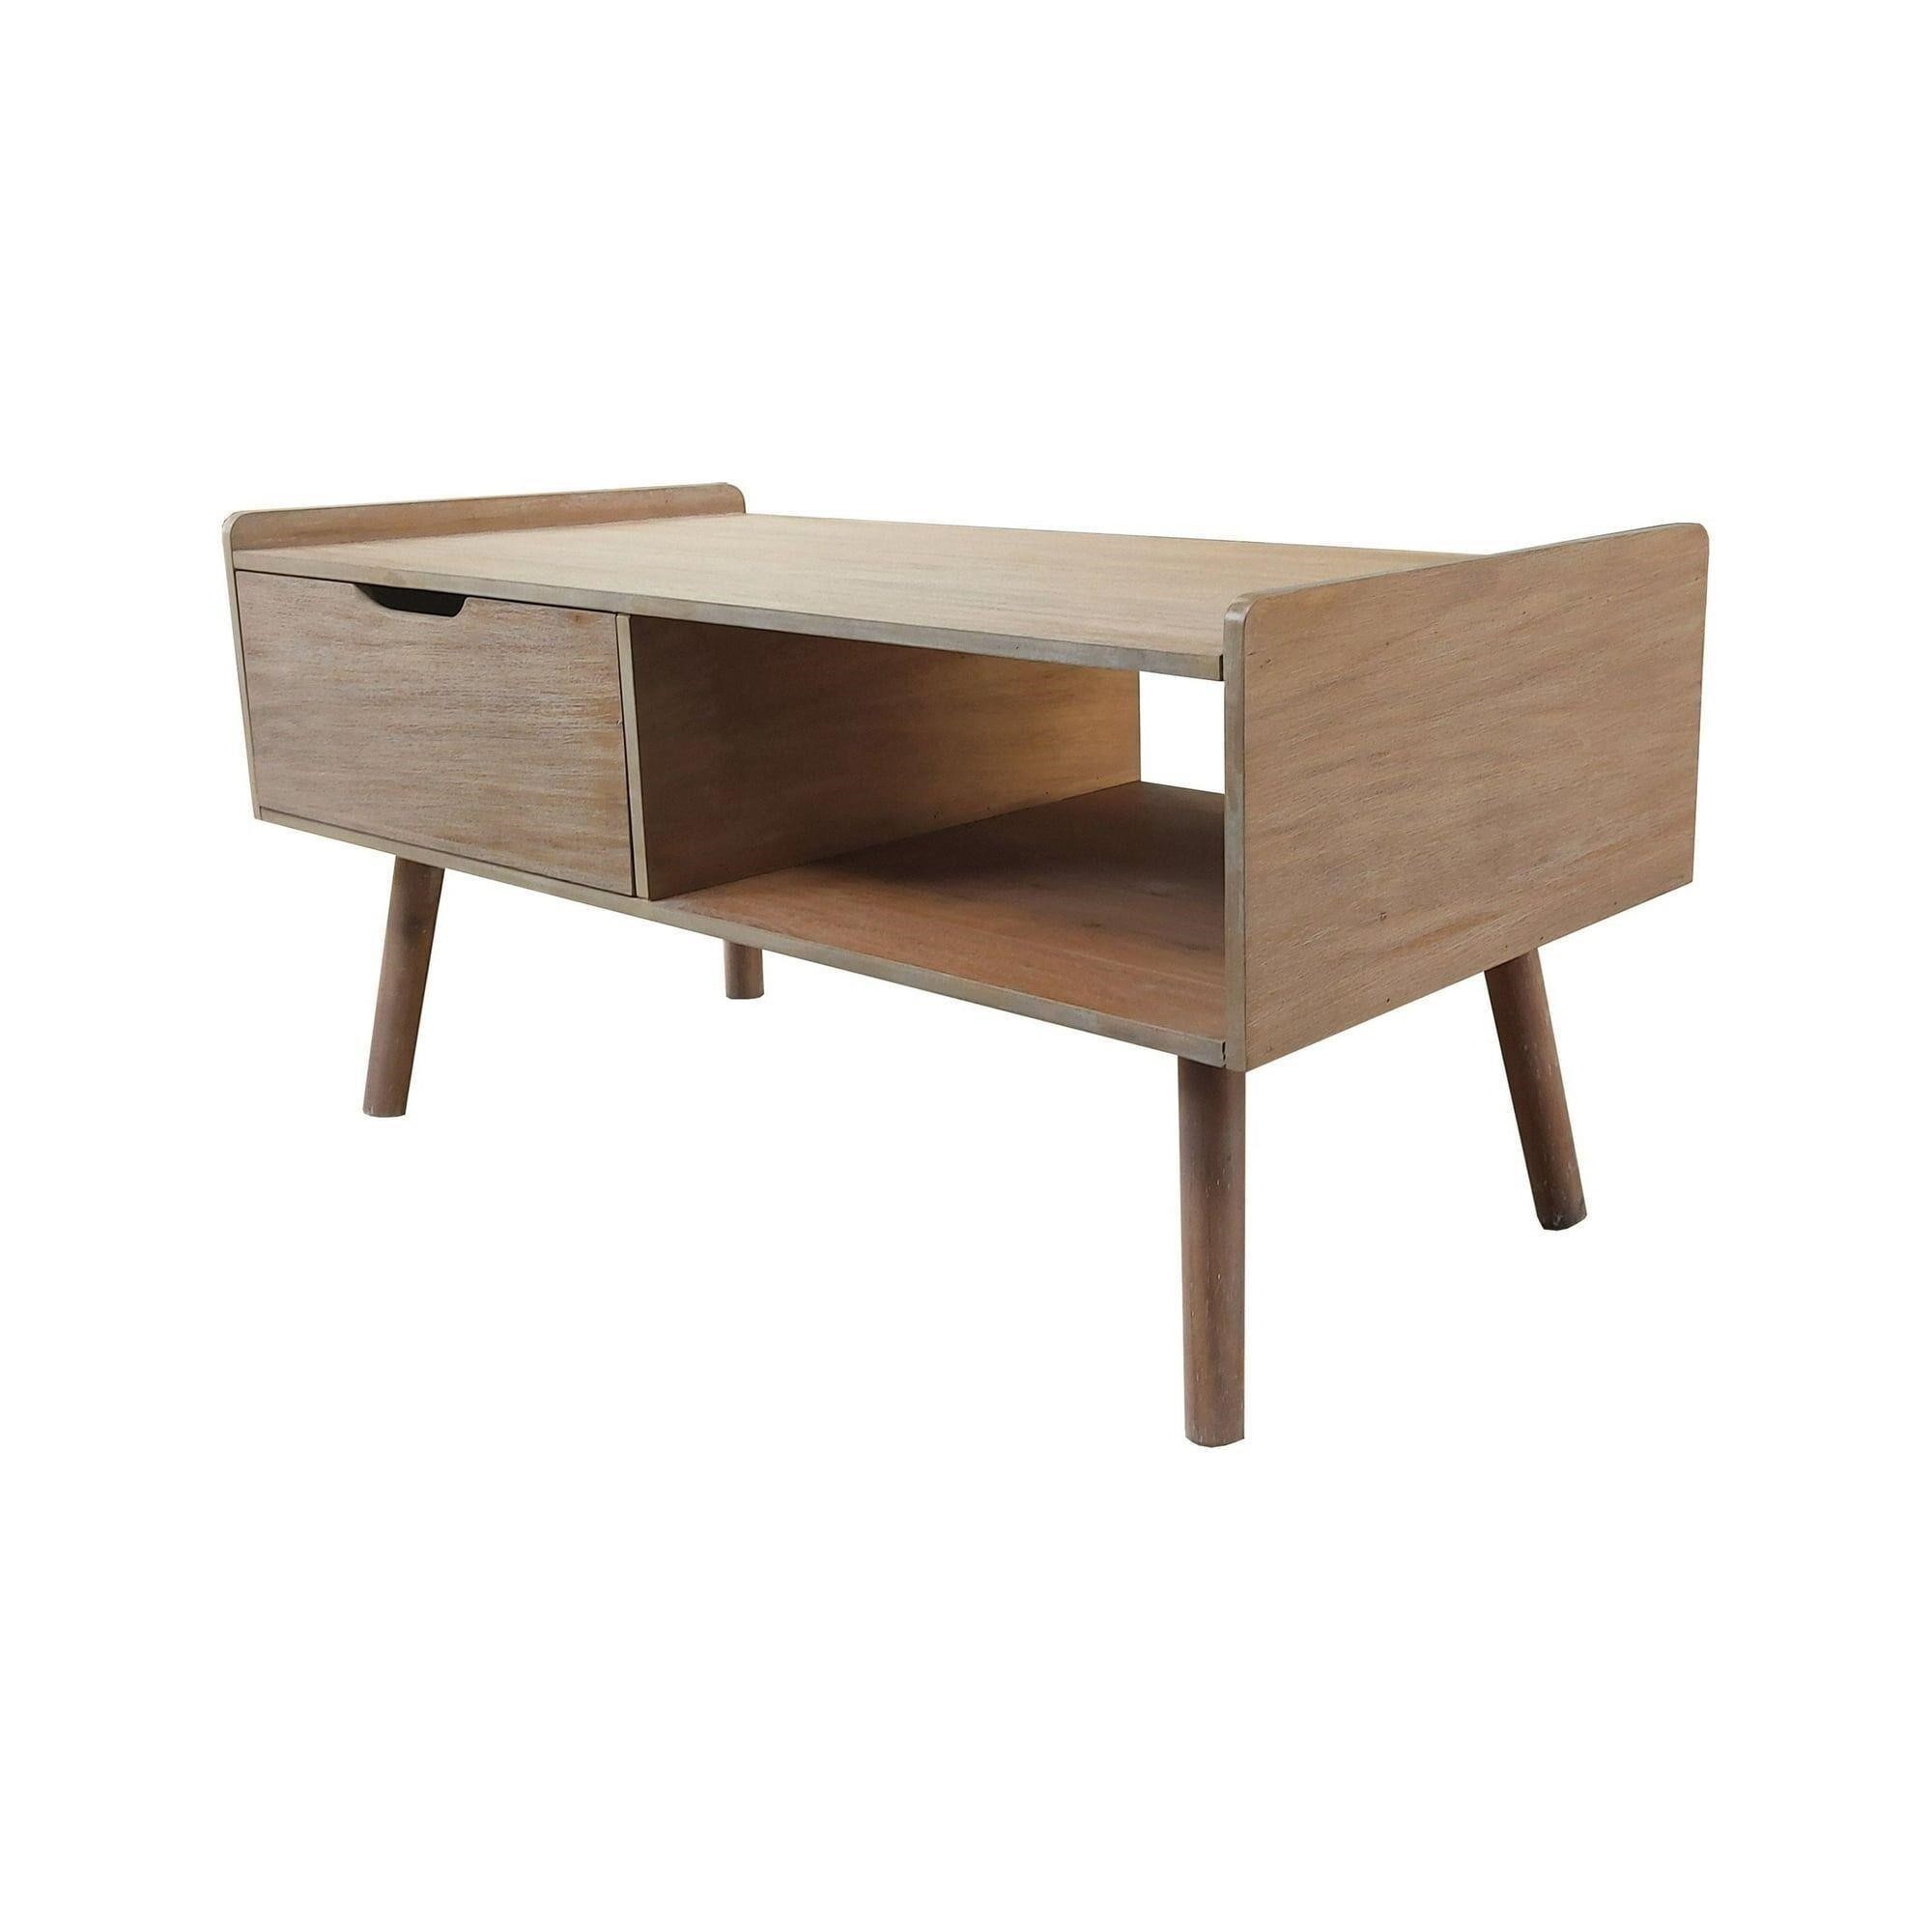 Décor Therapy Brockton Wood Coffee Table